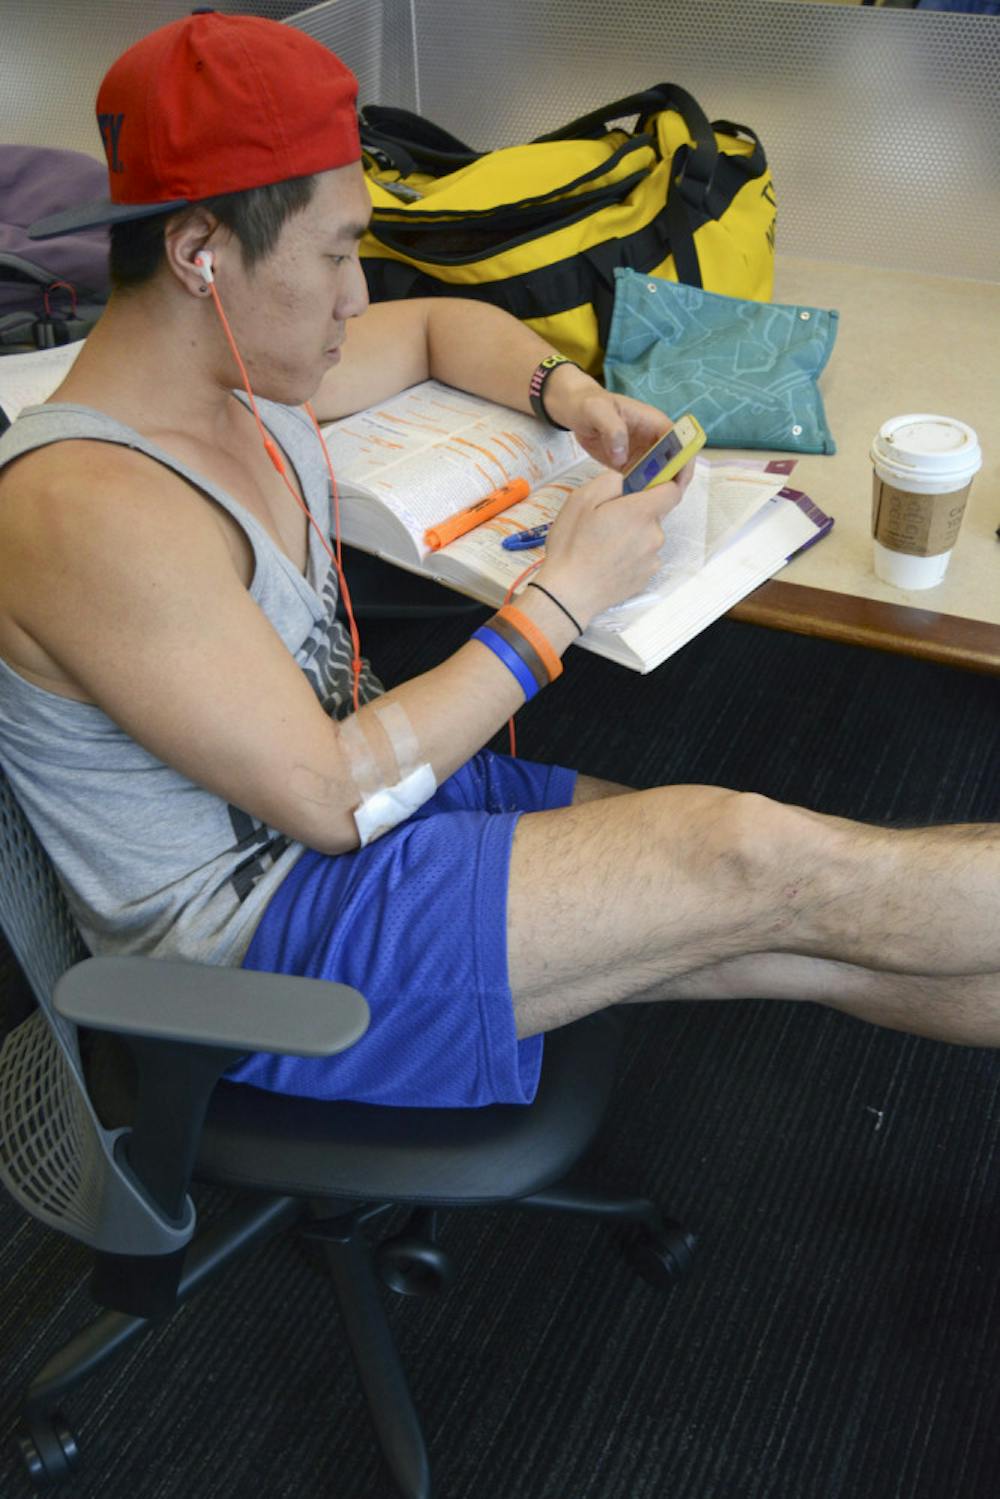 <p>Thomas Sit, a 24-year-old UF public health graduate student, takes a break from his work to use his smartphone in Library West on Sunday. Sit said he probably accessed the internet more on his phone than his laptop, mainly because the phone was more convenient for him.</p>